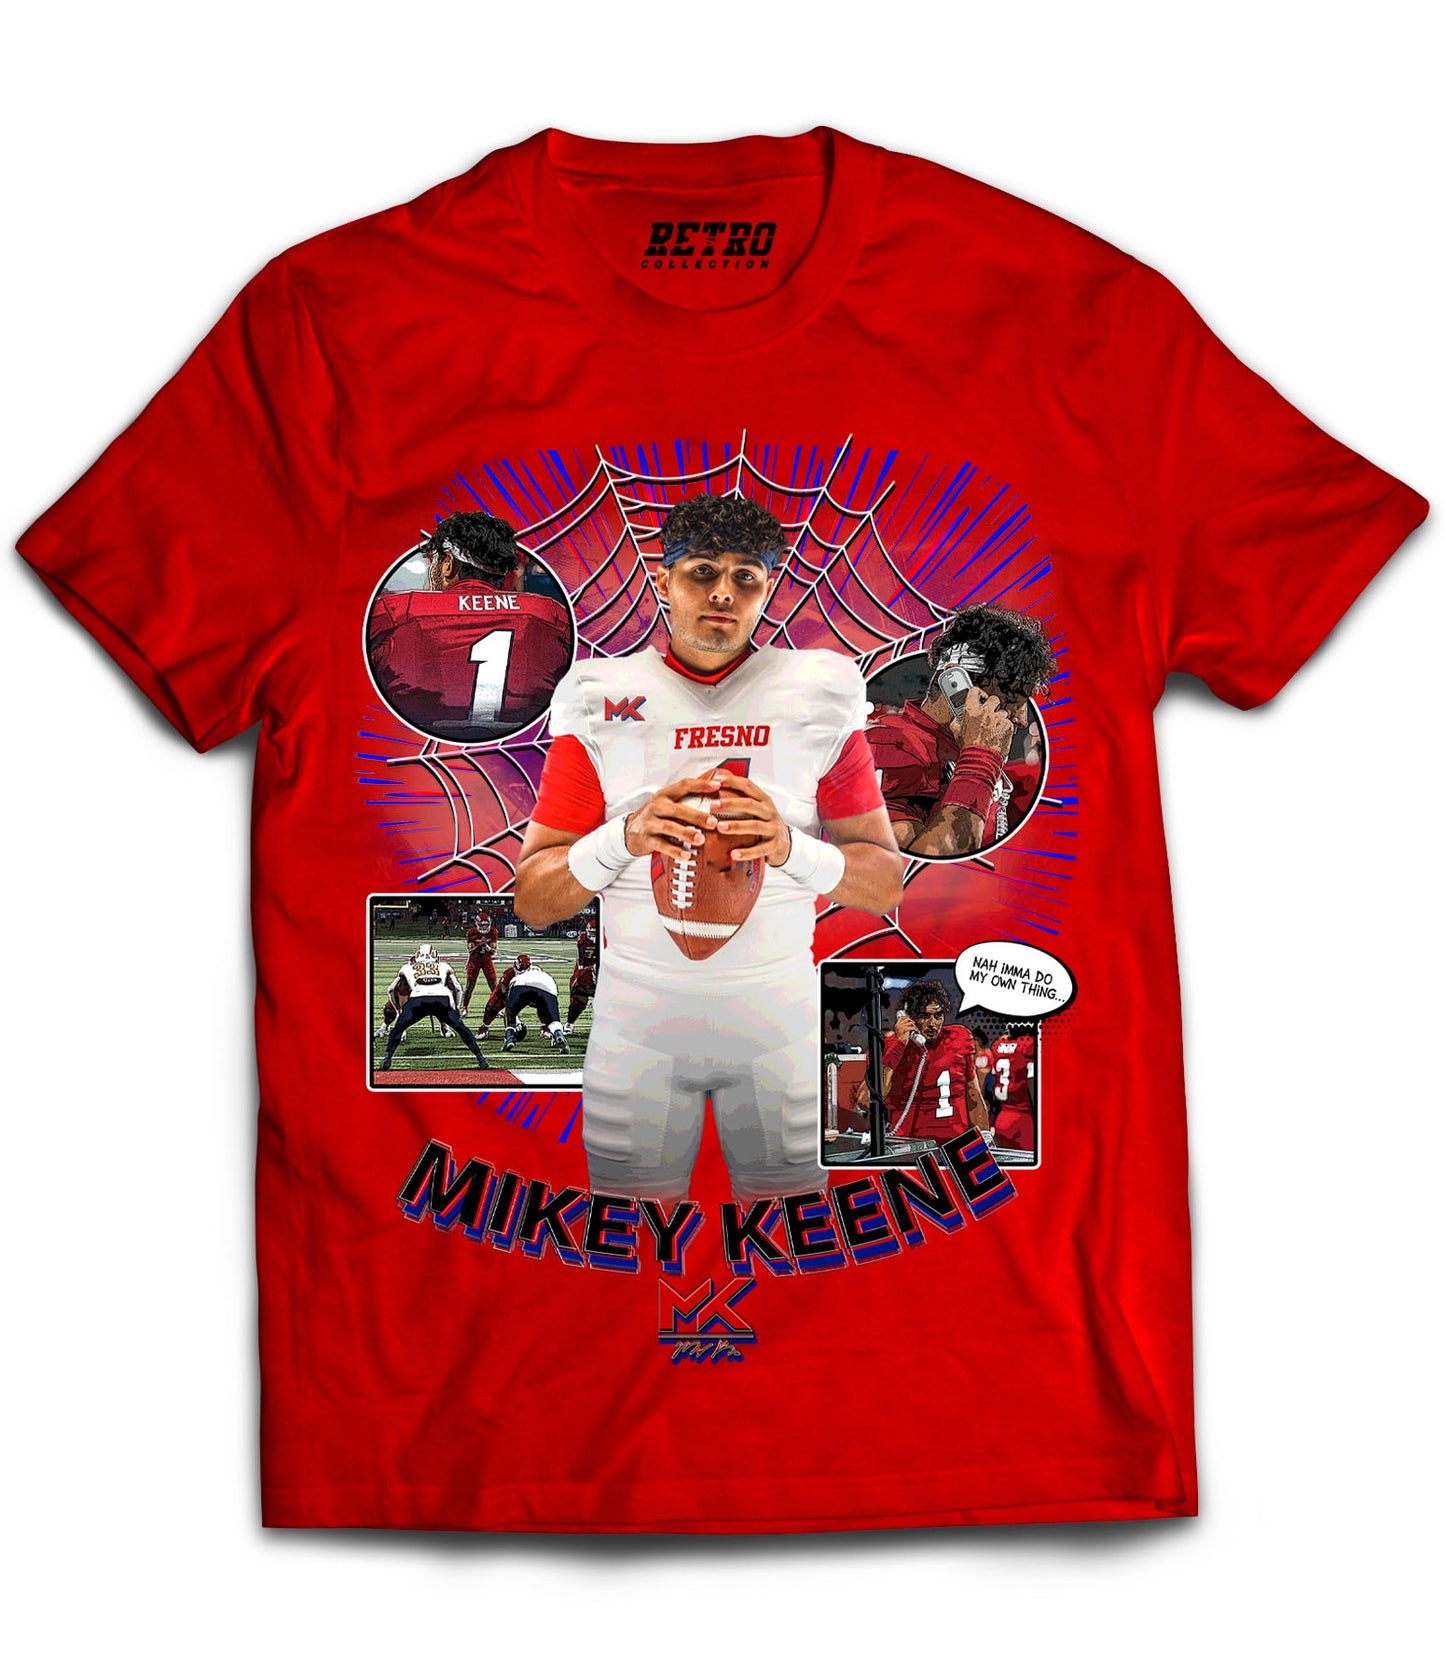 Mikey Keene “Mikey-Verse” Tribute Shirt *LIMITED EDITION* (Black, Red, White)